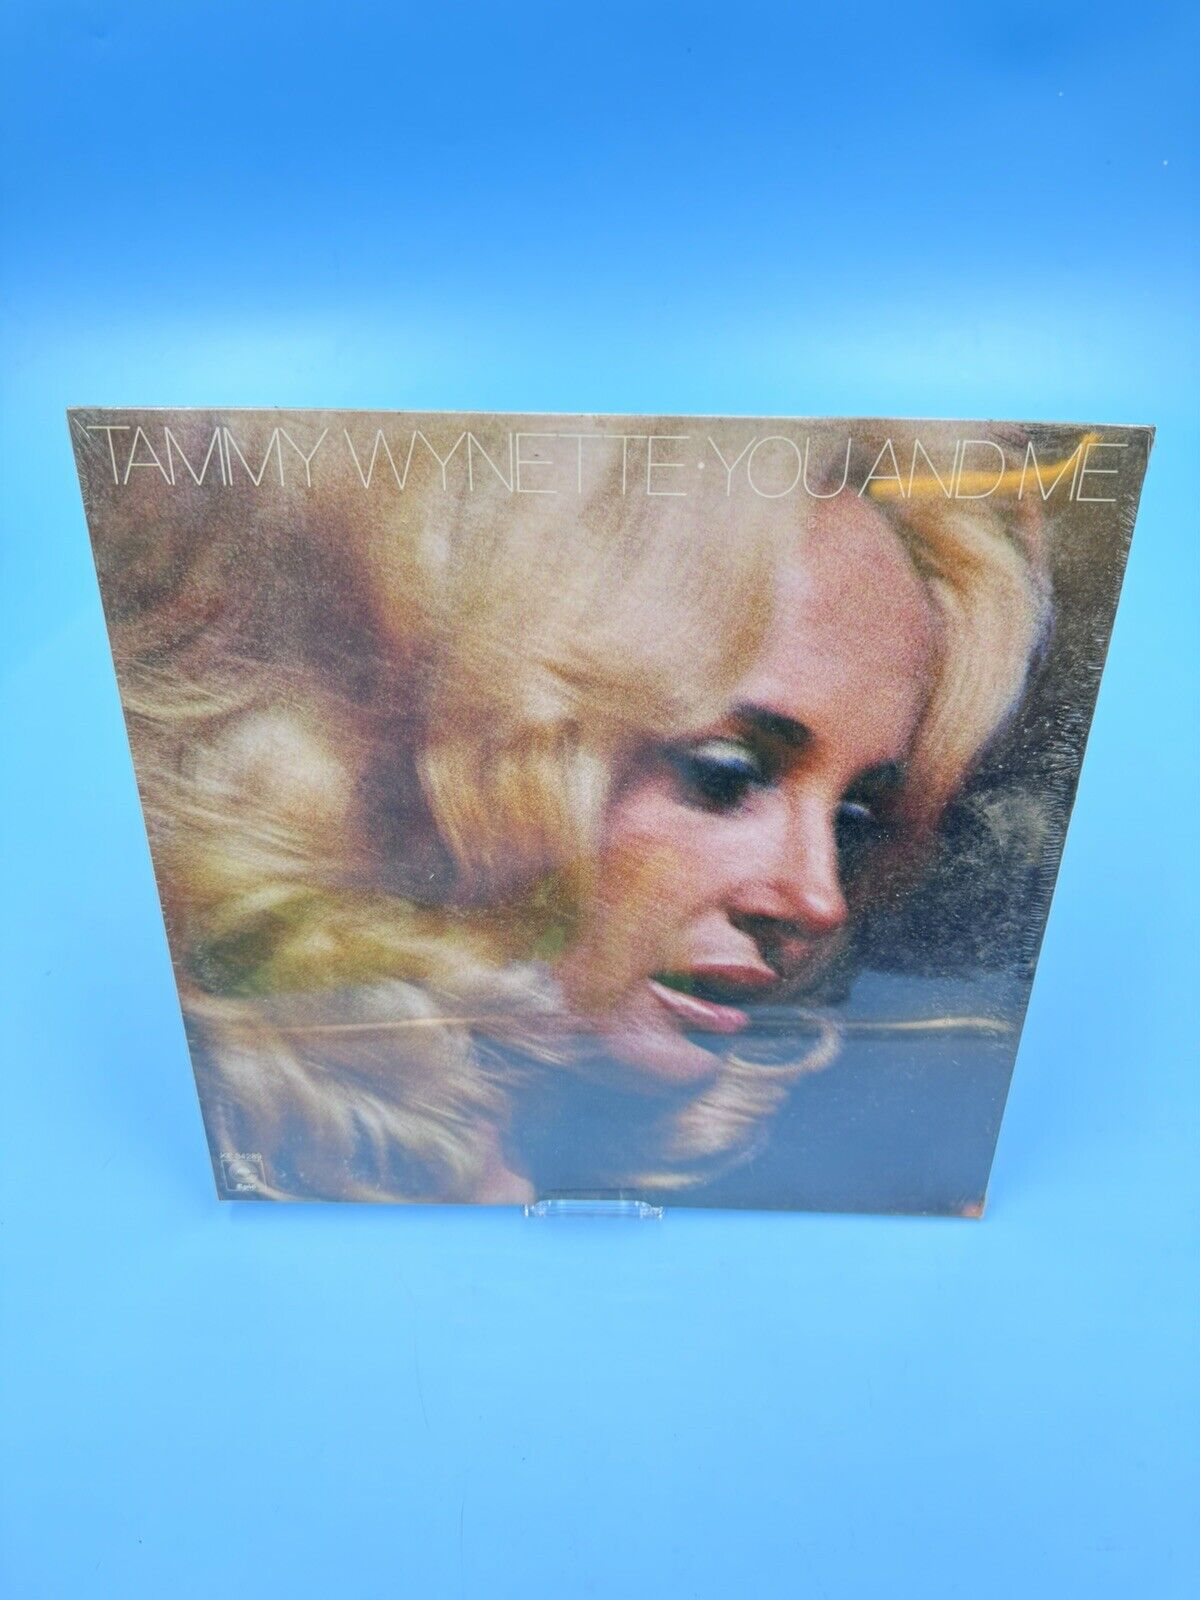 TAMMY WYNETTE YOU AND ME   Every Now And Then    NEW VINYL LP ALBUM